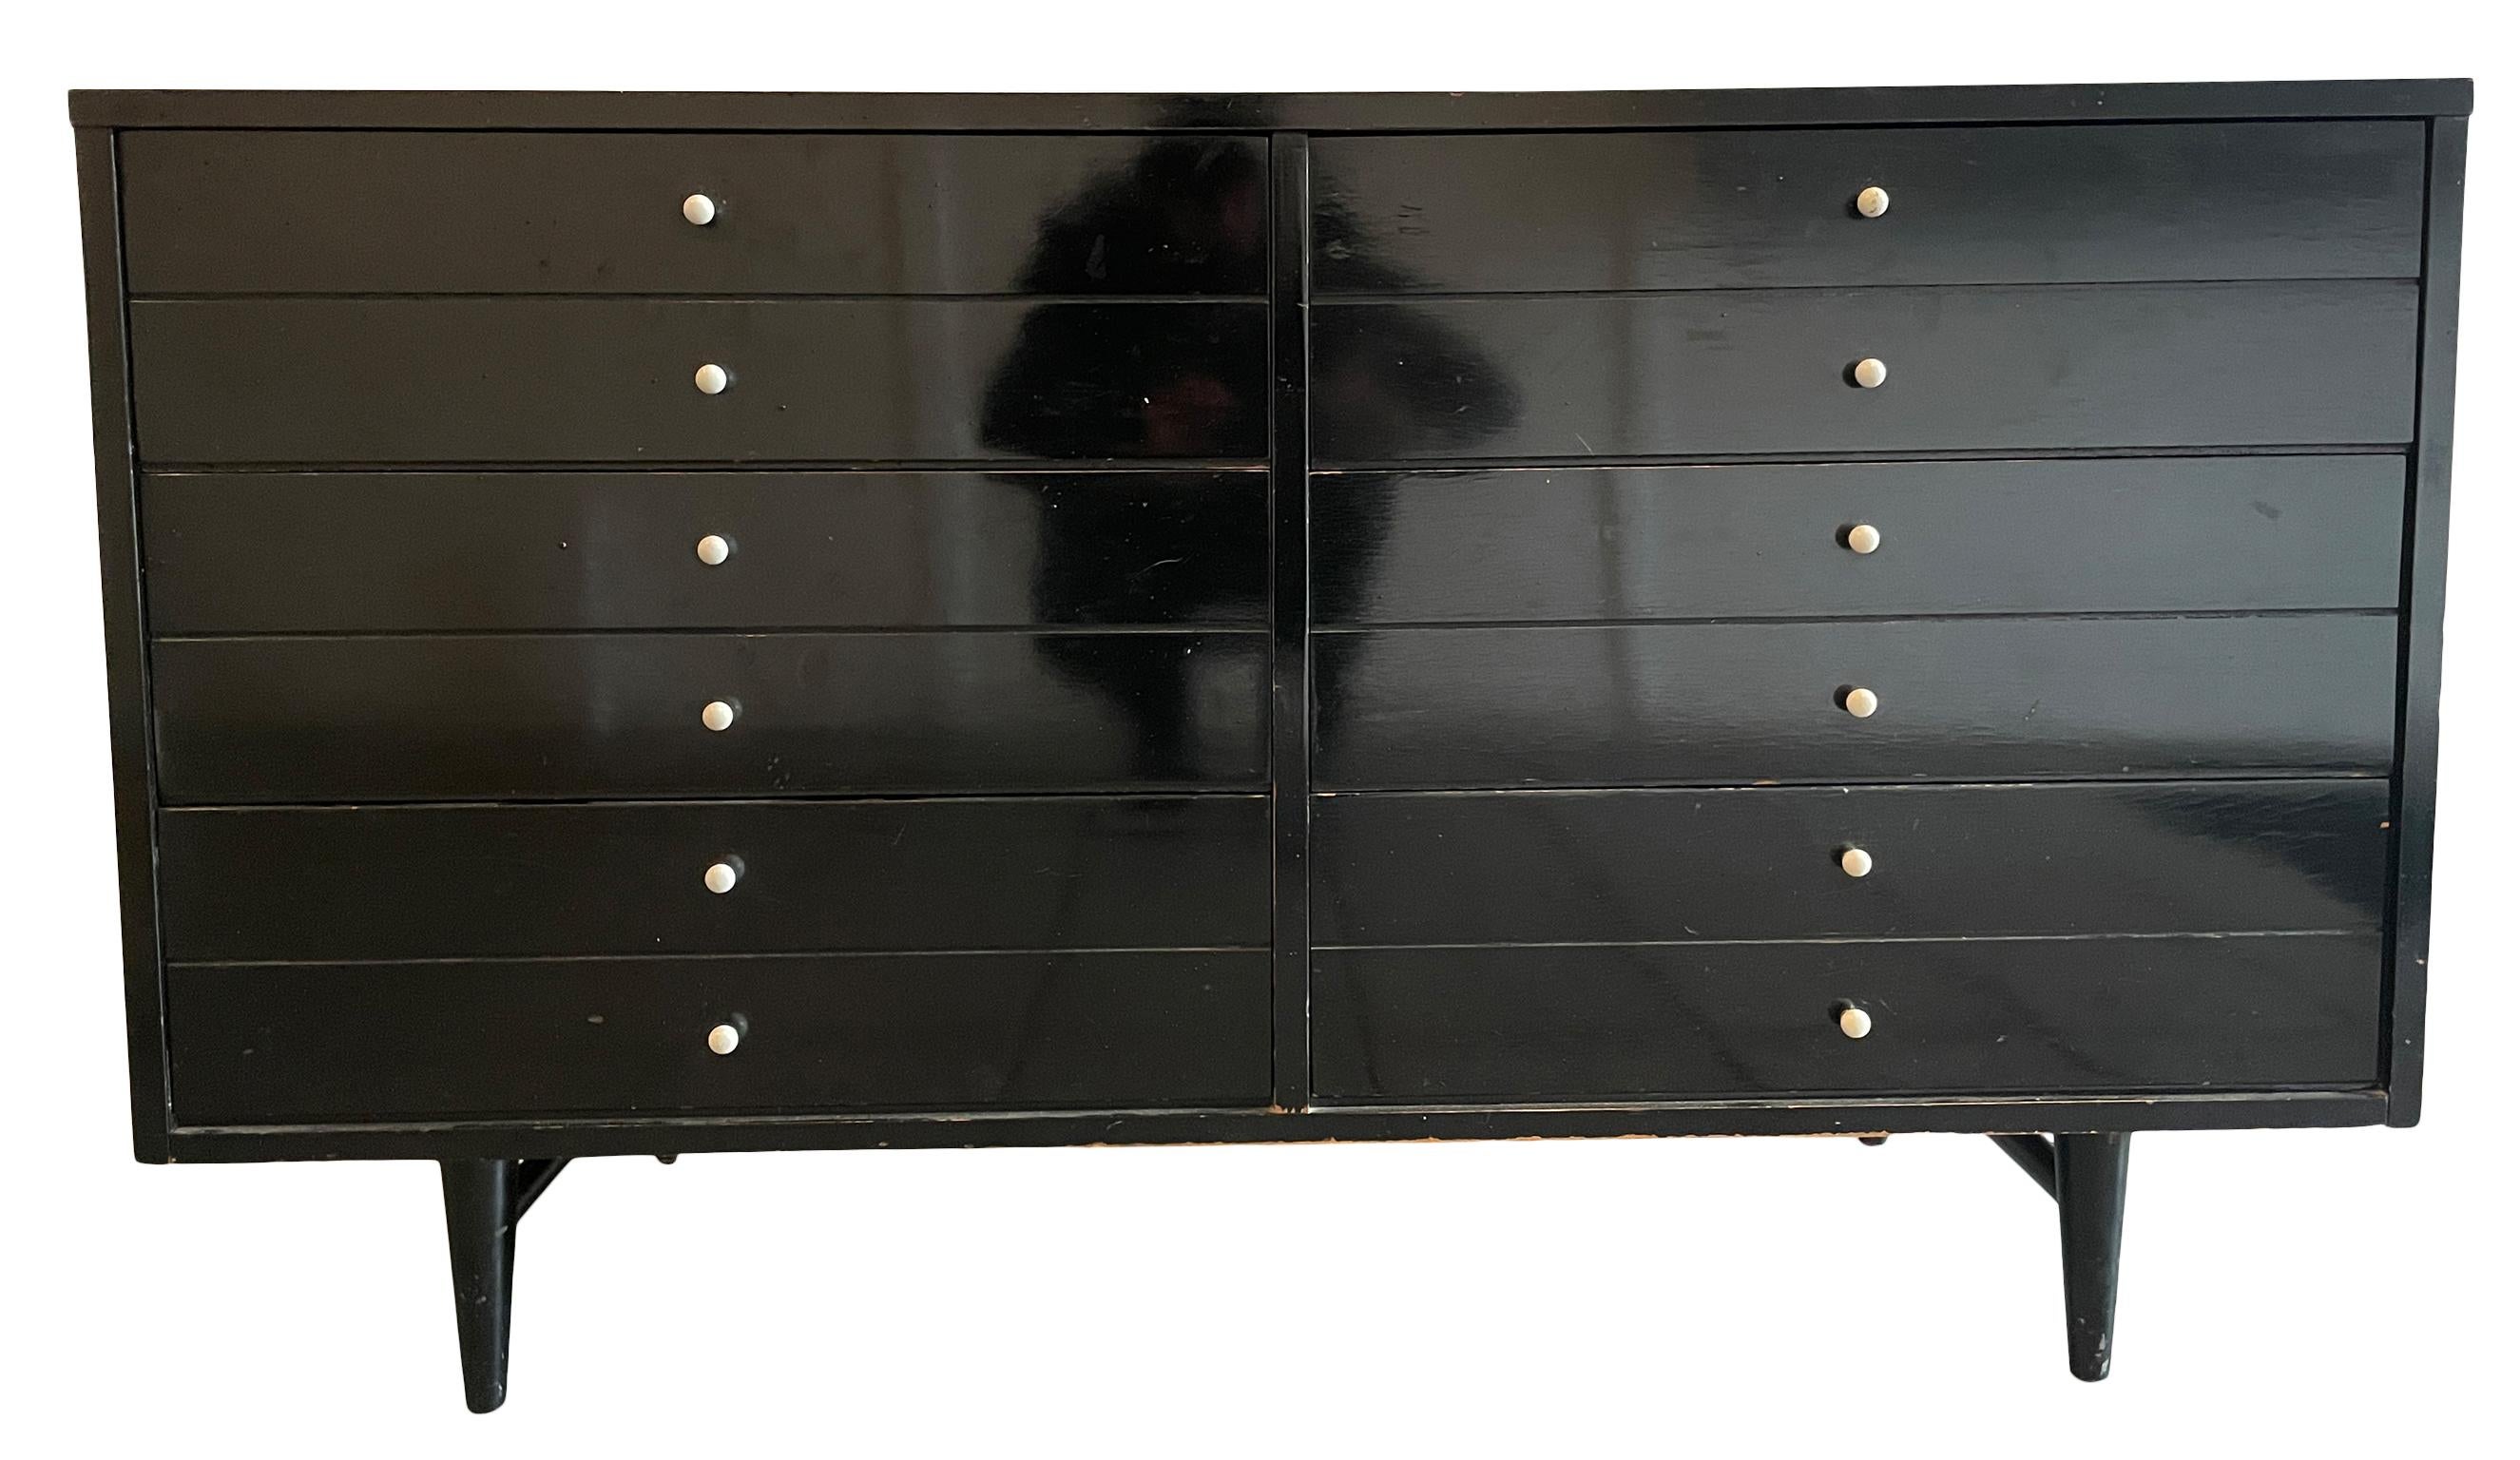 Mid-Century Modern American of Martinsville 6 drawer dresser black white. All Original Vintage condition - Black Lacquer shows wear - White glass and brass knobs. All drawers slide smooth and clean inside. Has White Laminate top. Located in Brooklyn